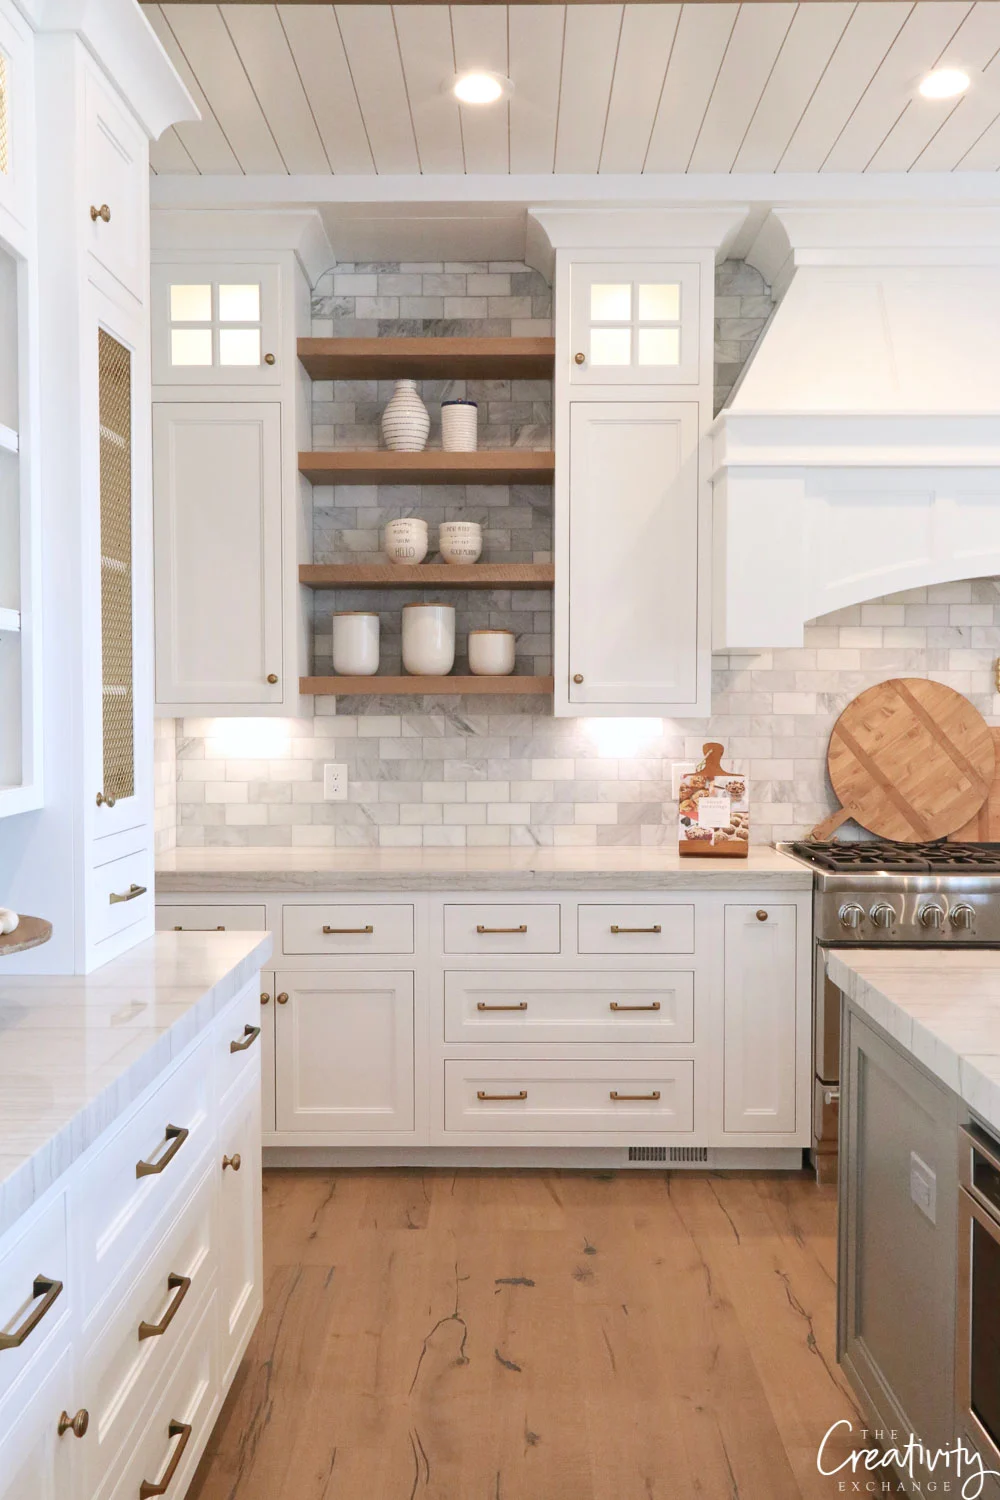 White kitchen cabinetry, gold cabinet hardware, wood floating shelves, wood cutting boards stacked behind range